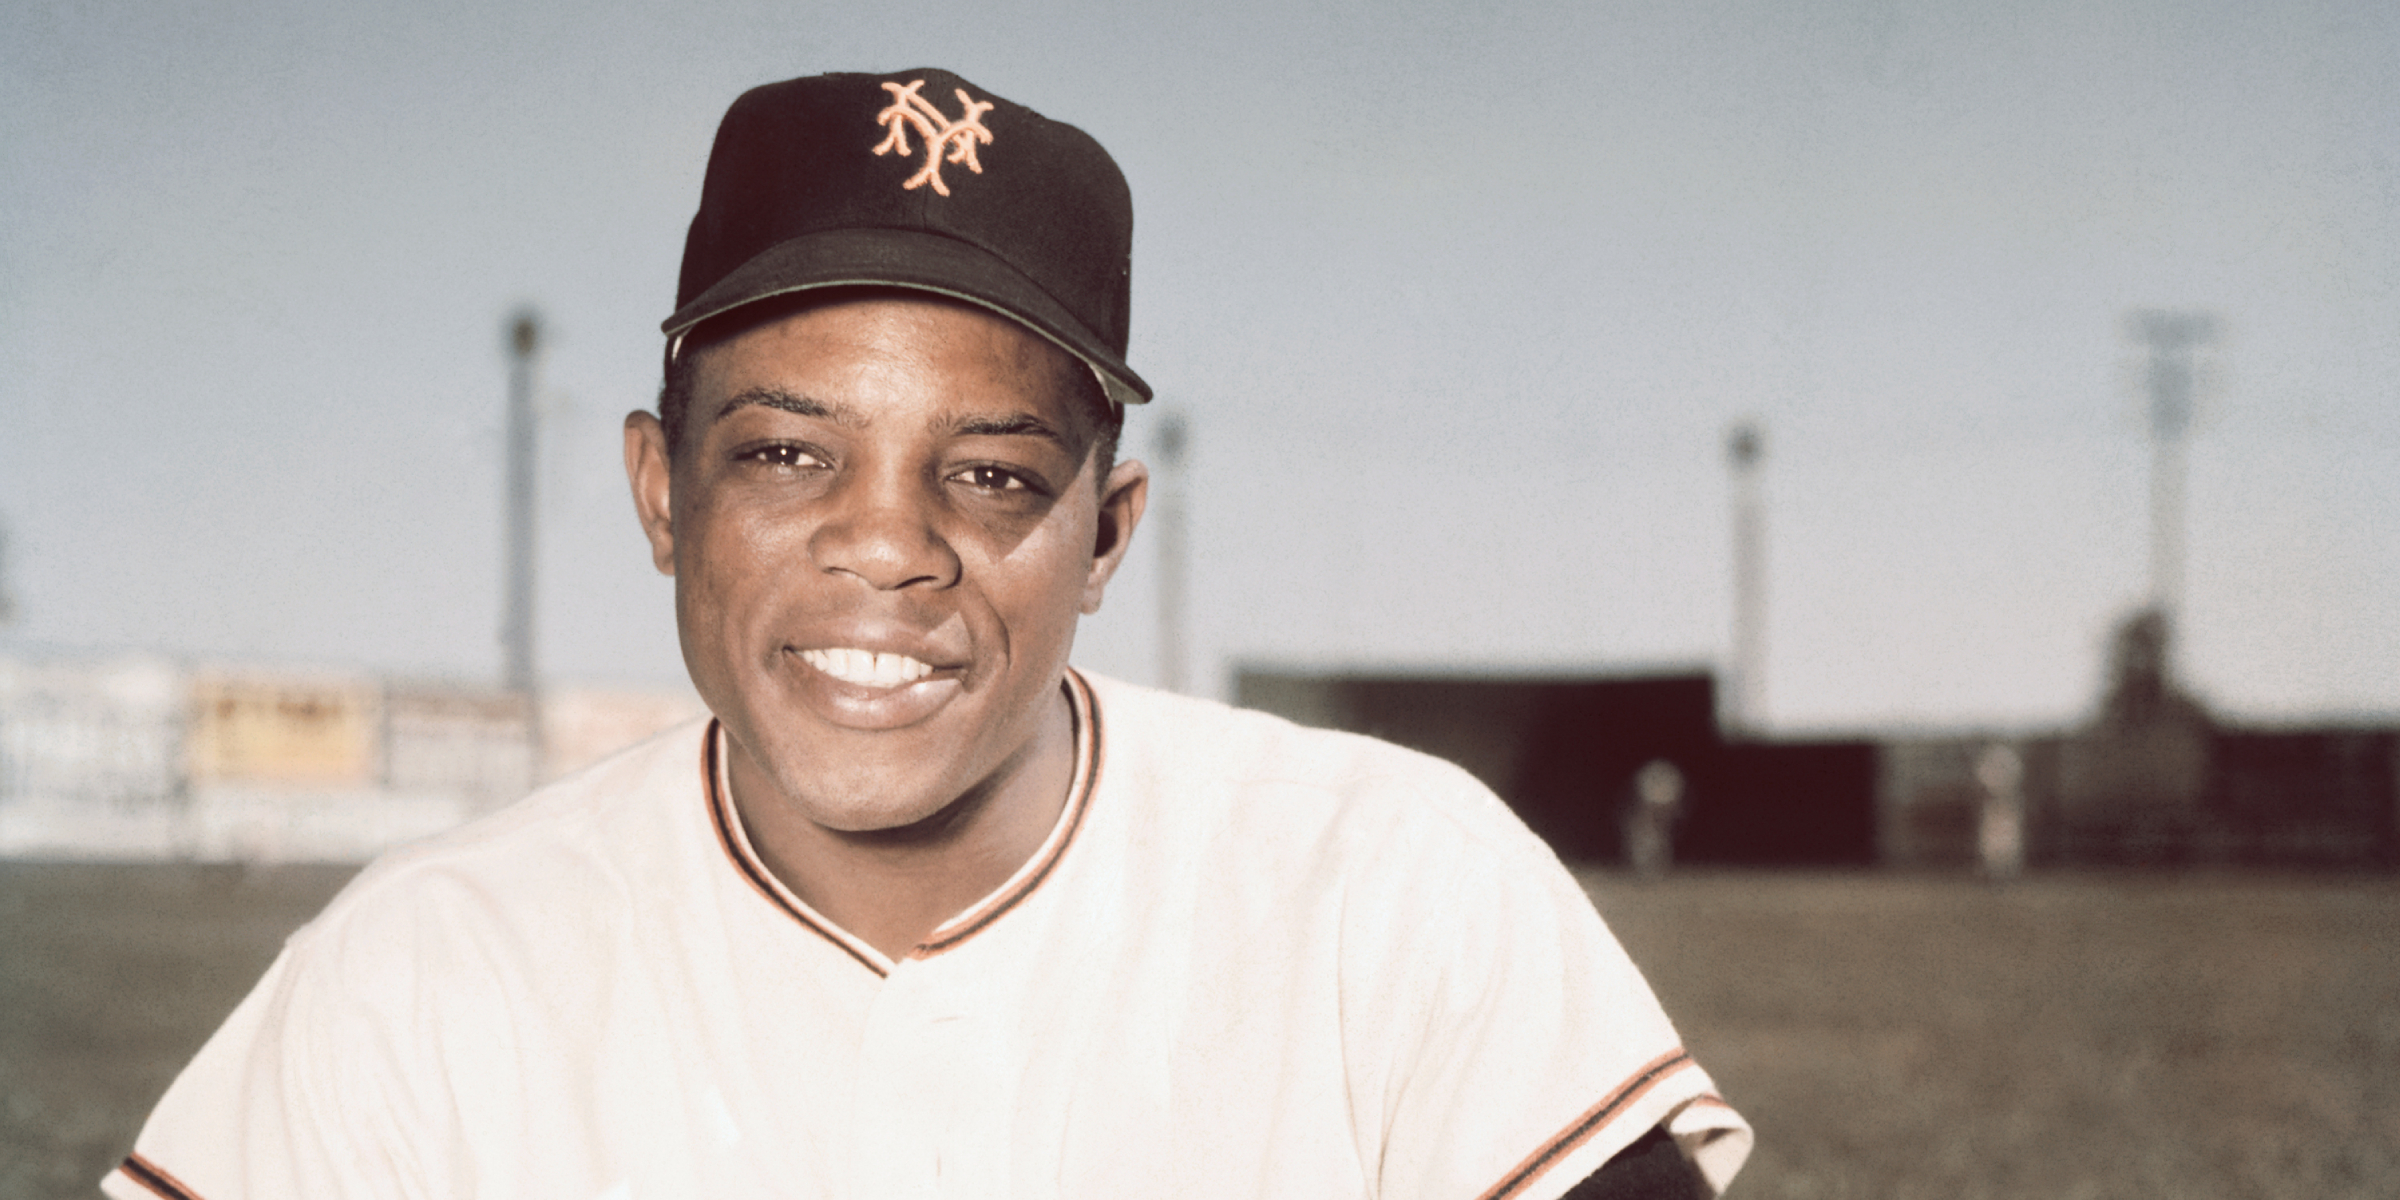 Willie Mays | Source: Getty Images